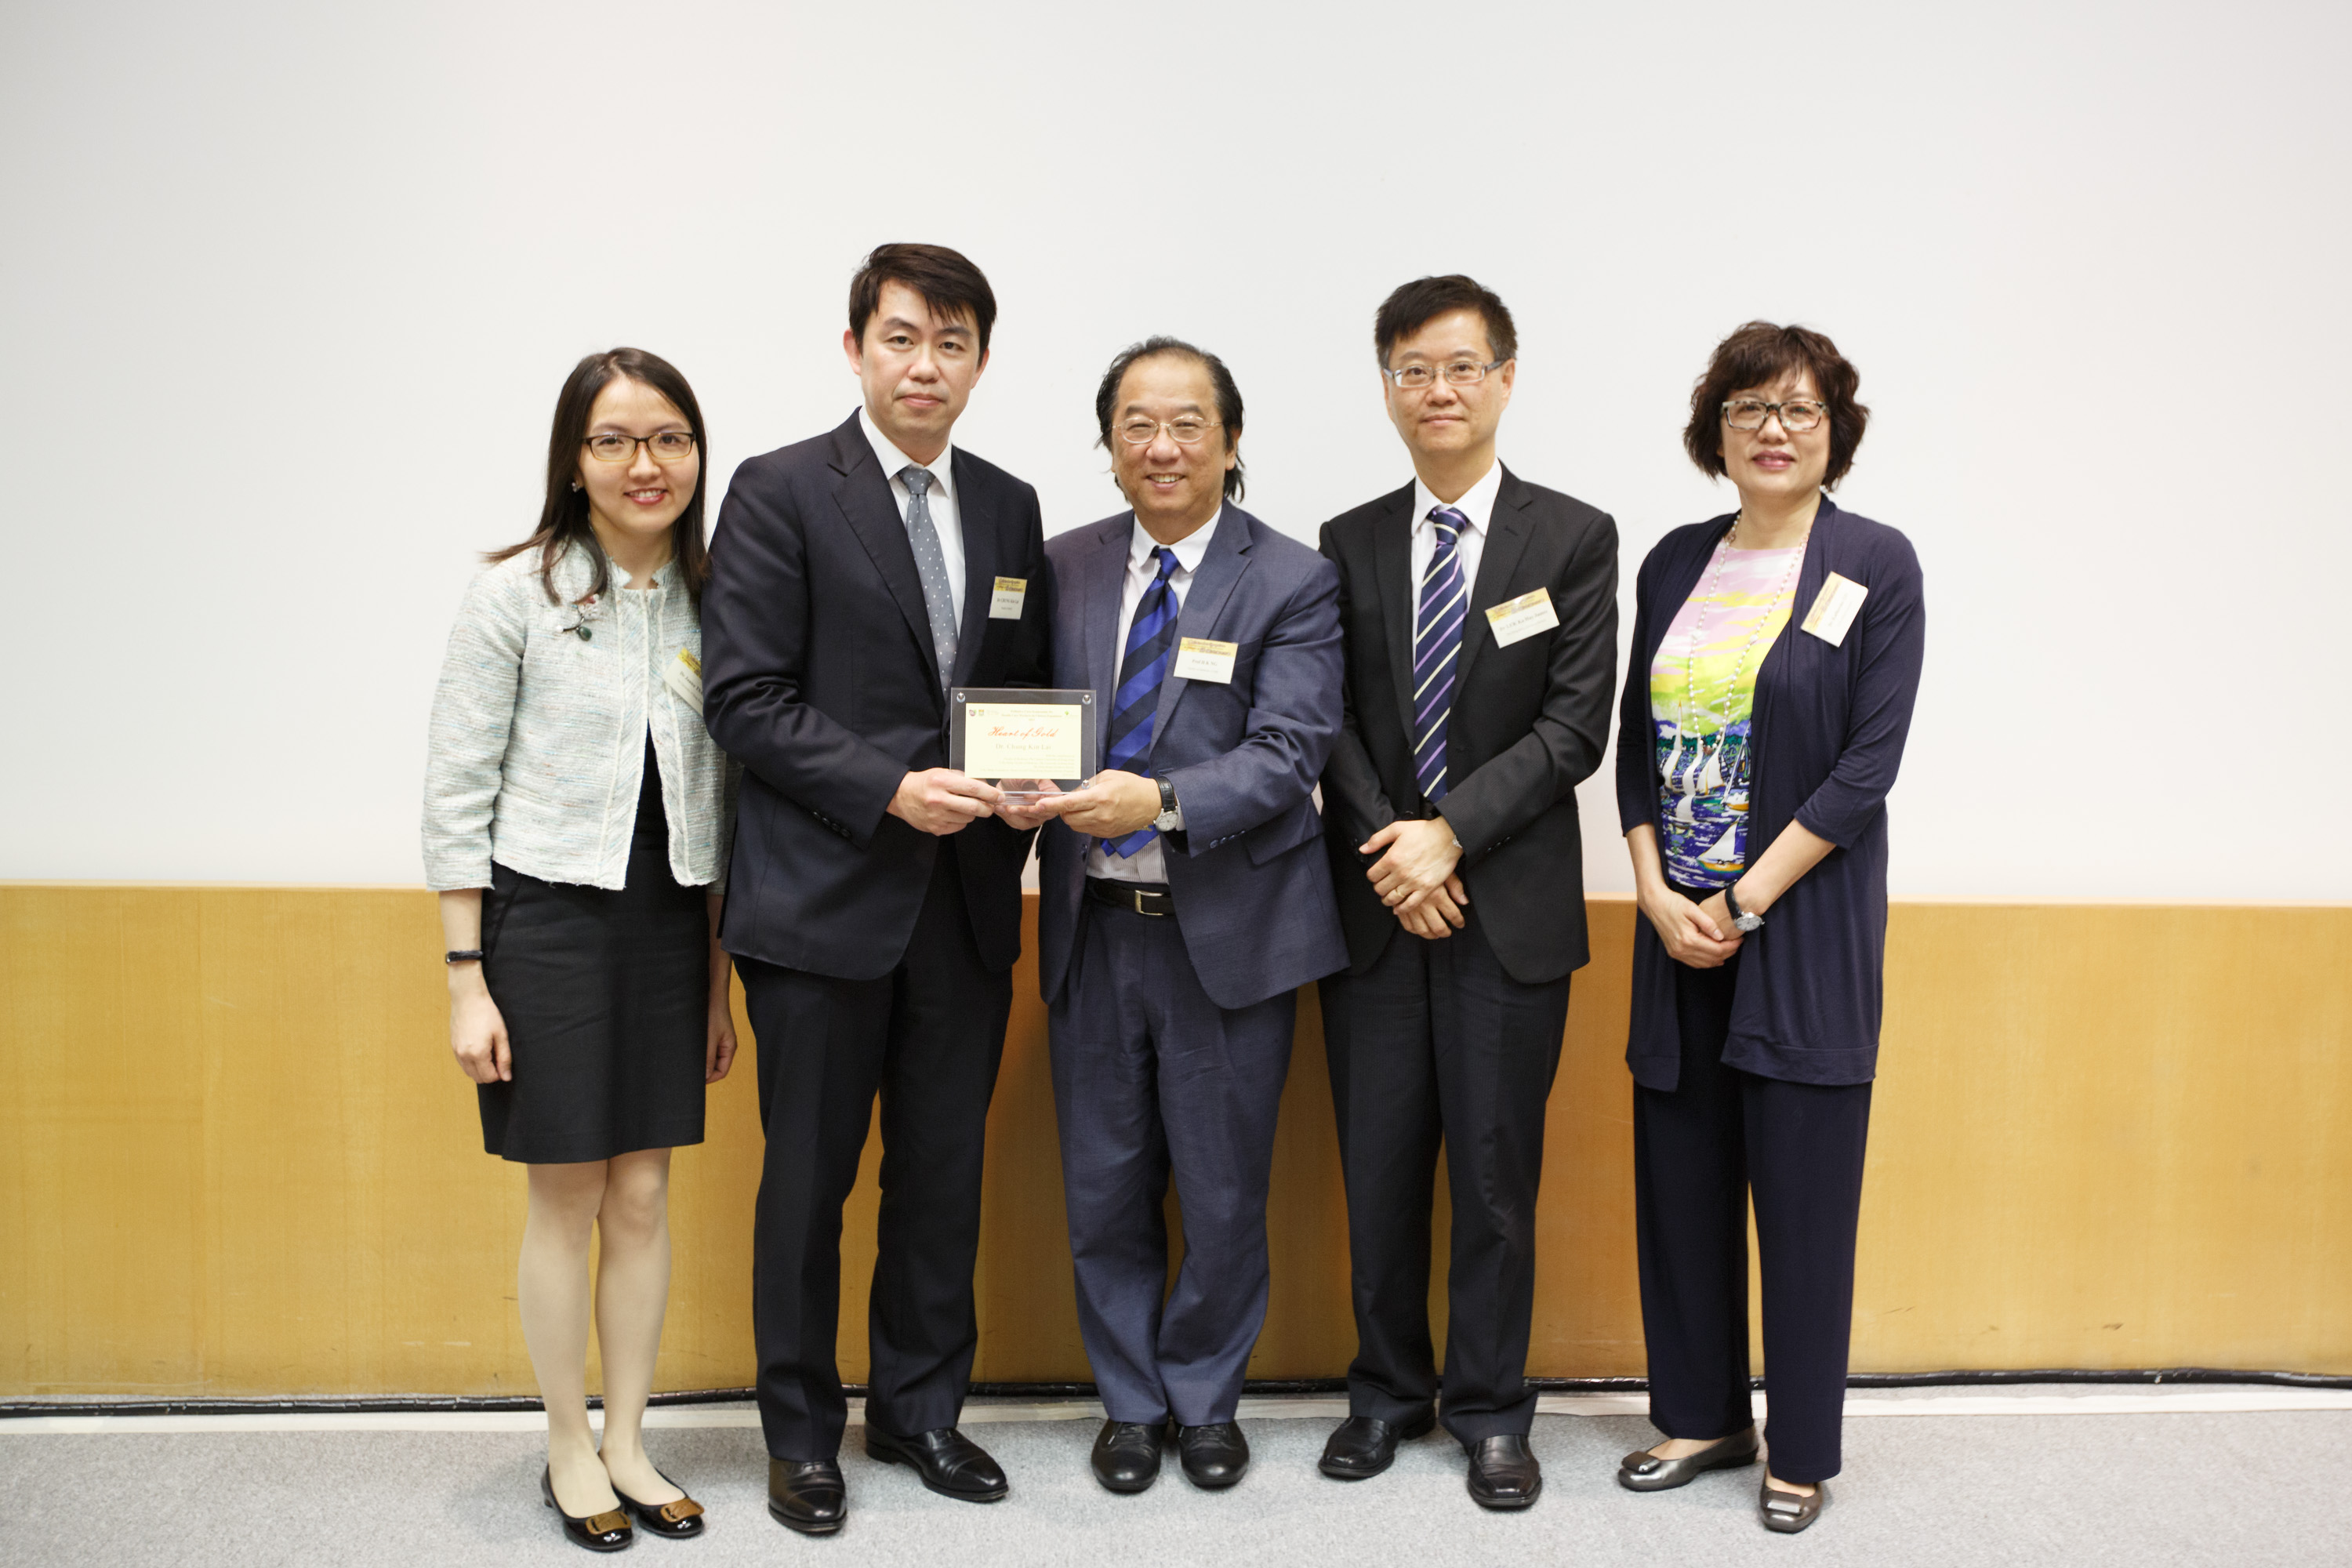 (From left) Dr. Janice Tsang, Assistant Dean (Alumni Relations), Li Ka Shing Faculty of Medicine, HKU; Dr. Chung Kin Lin, Chief Manager, Integrated Care Programs, Hospital Authority; Prof. H. K. Ng, Acting Dean, Faculty of Medicine, CUHK; Dr. Luk Ka Hay, Vice-President, The Hong Kong Geriatrics Society and Dr. Katherine Lo, Senior Project Manager, Li Ka Shing Foundation officiated the Opening Ceremony of the symposium.